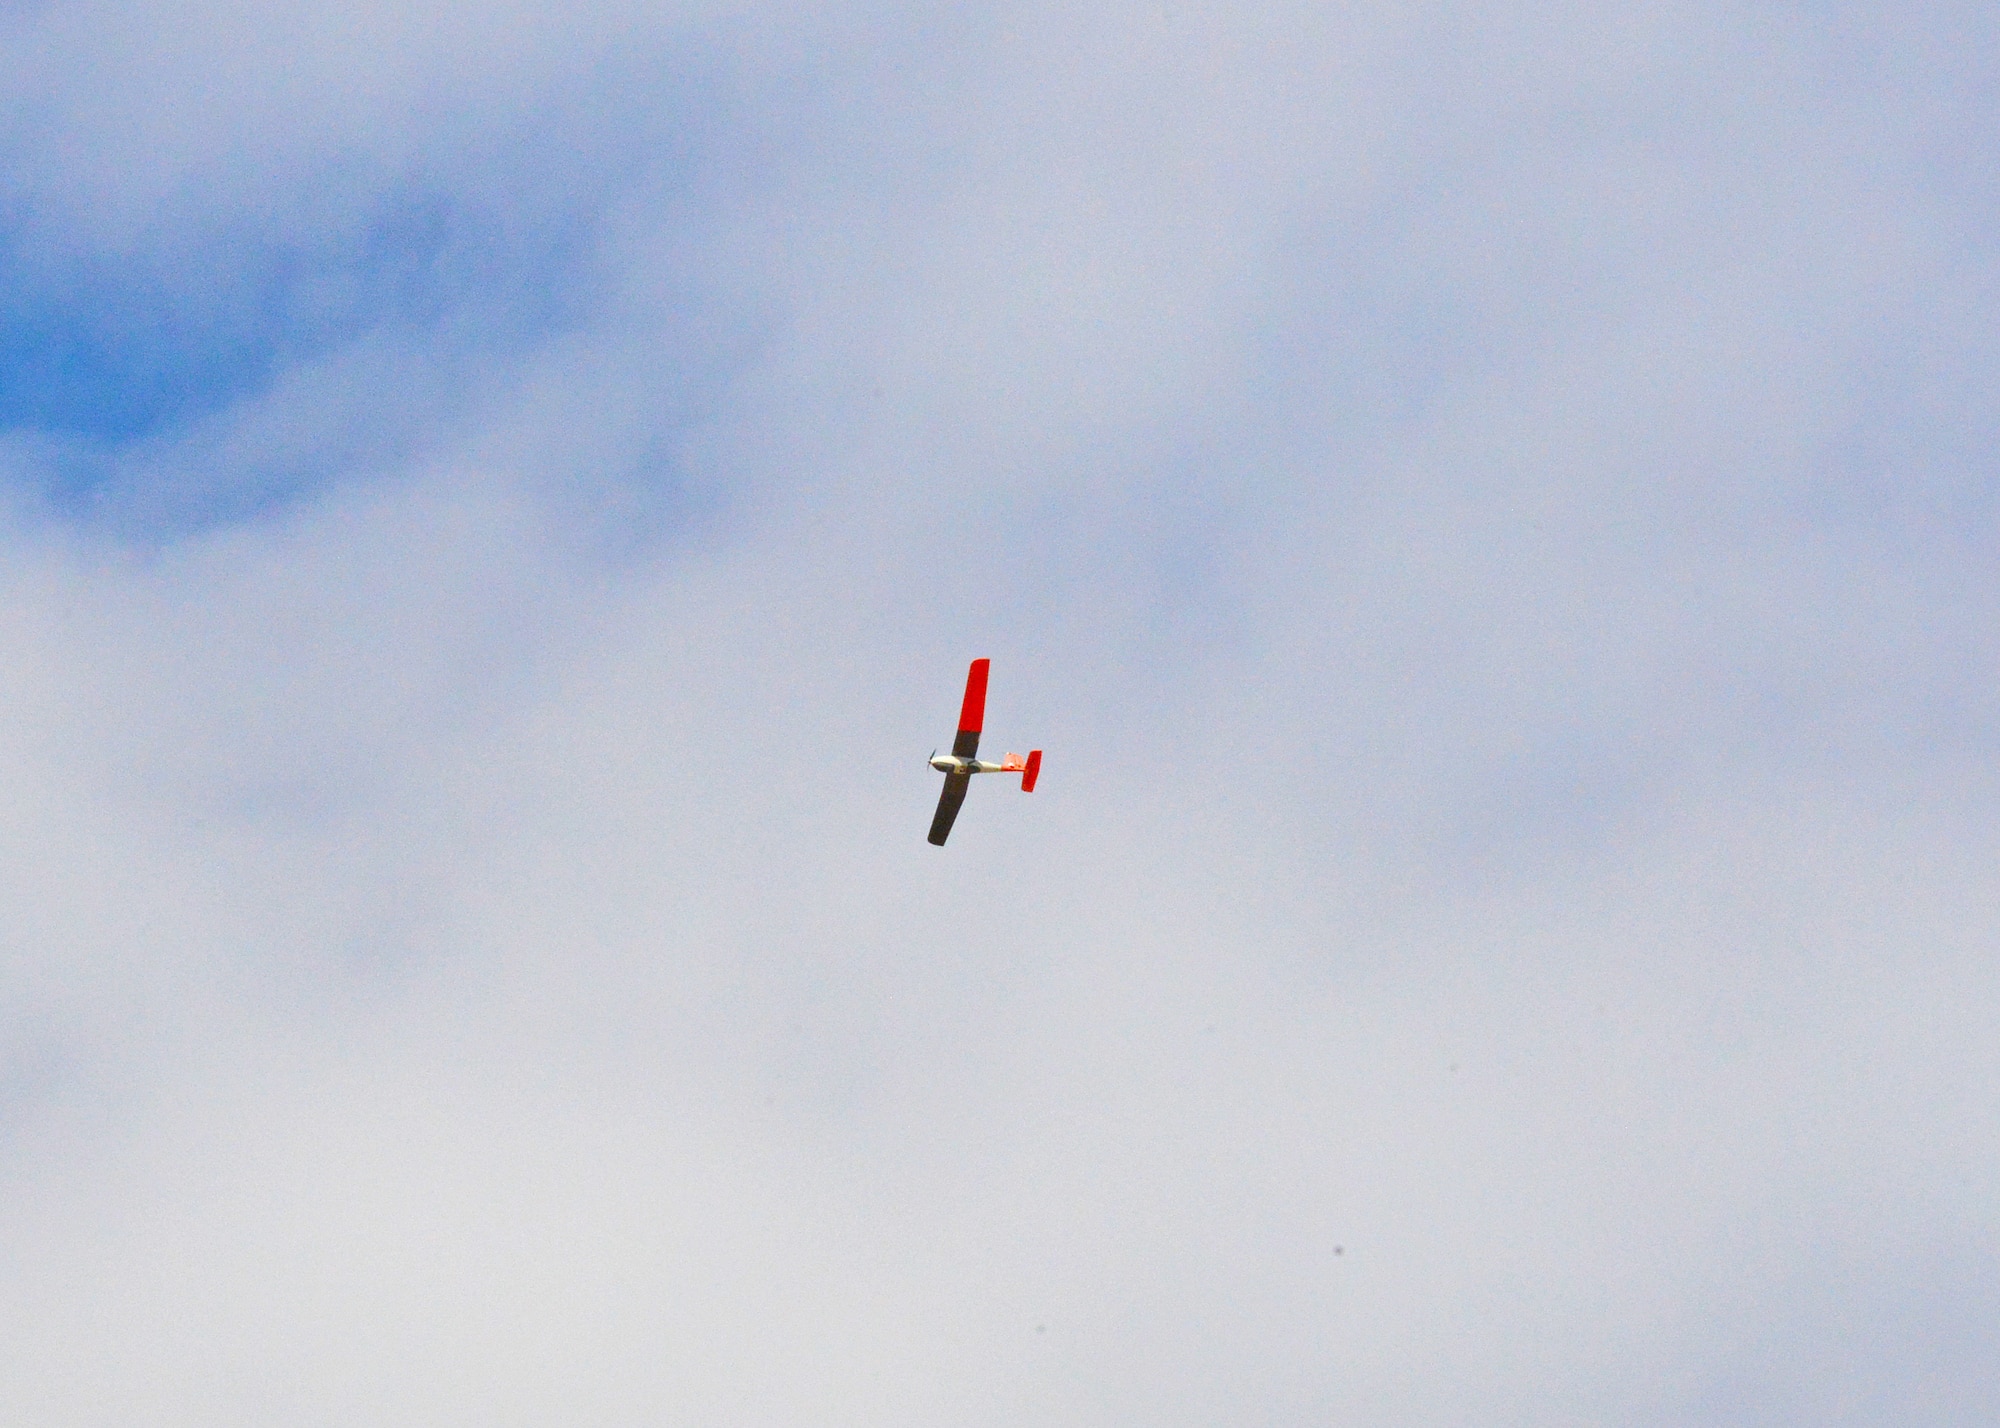 A Lynx small unmanned aircraft system made by Swift Radio Planes flies over Edwards Feb. 27. The 412th Test Wing’s Emerging Technologies Combined Test Force conducted its first autonomy flight test Feb. 26-28 (U.S. Air Force photo by Kenji Thuloweit)